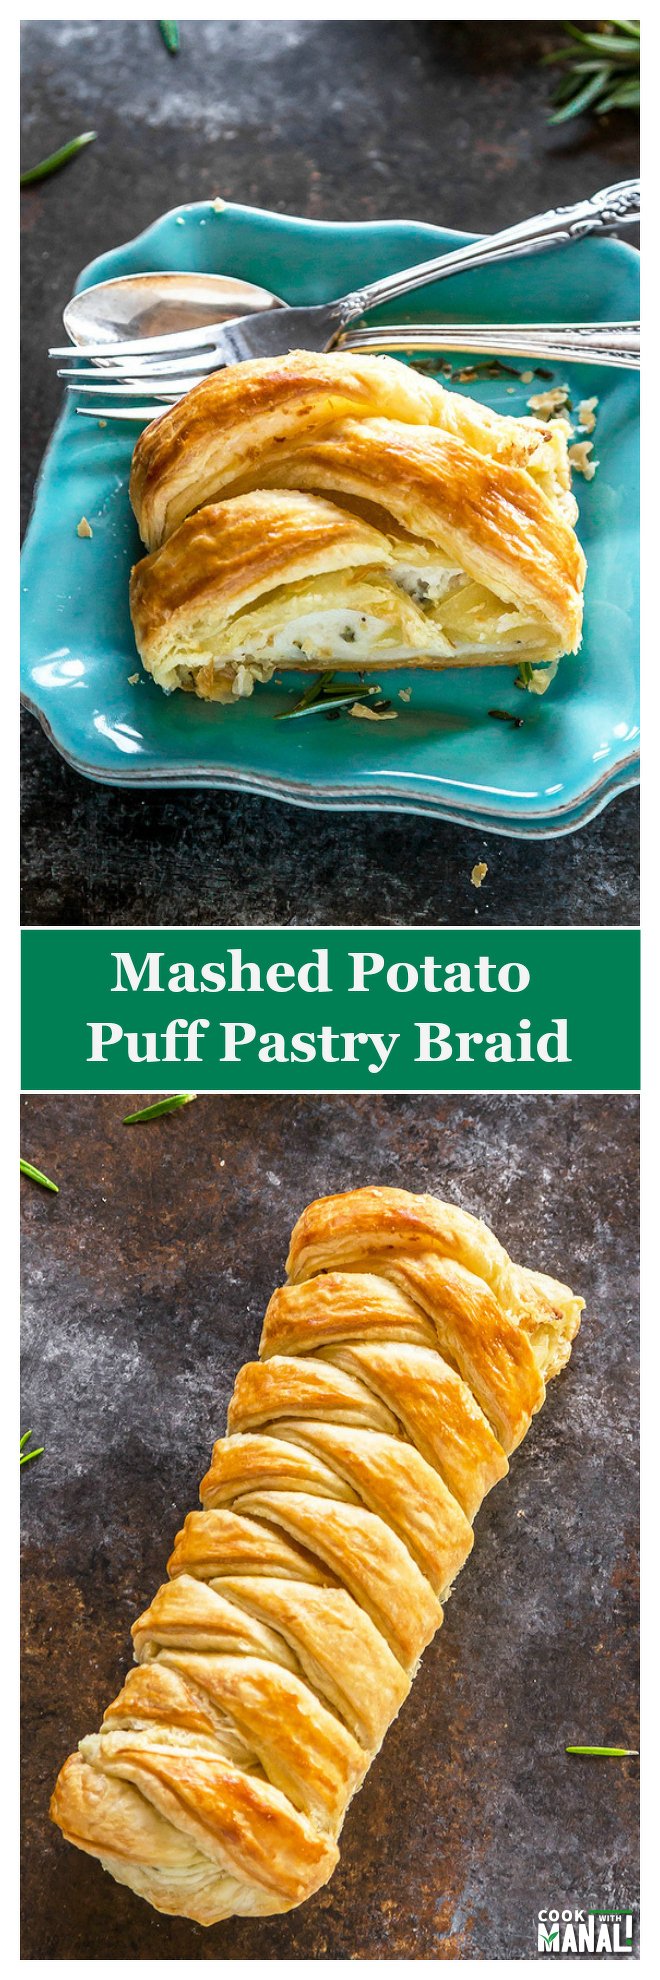 mashed-potato-puff-pastry-braid-collage